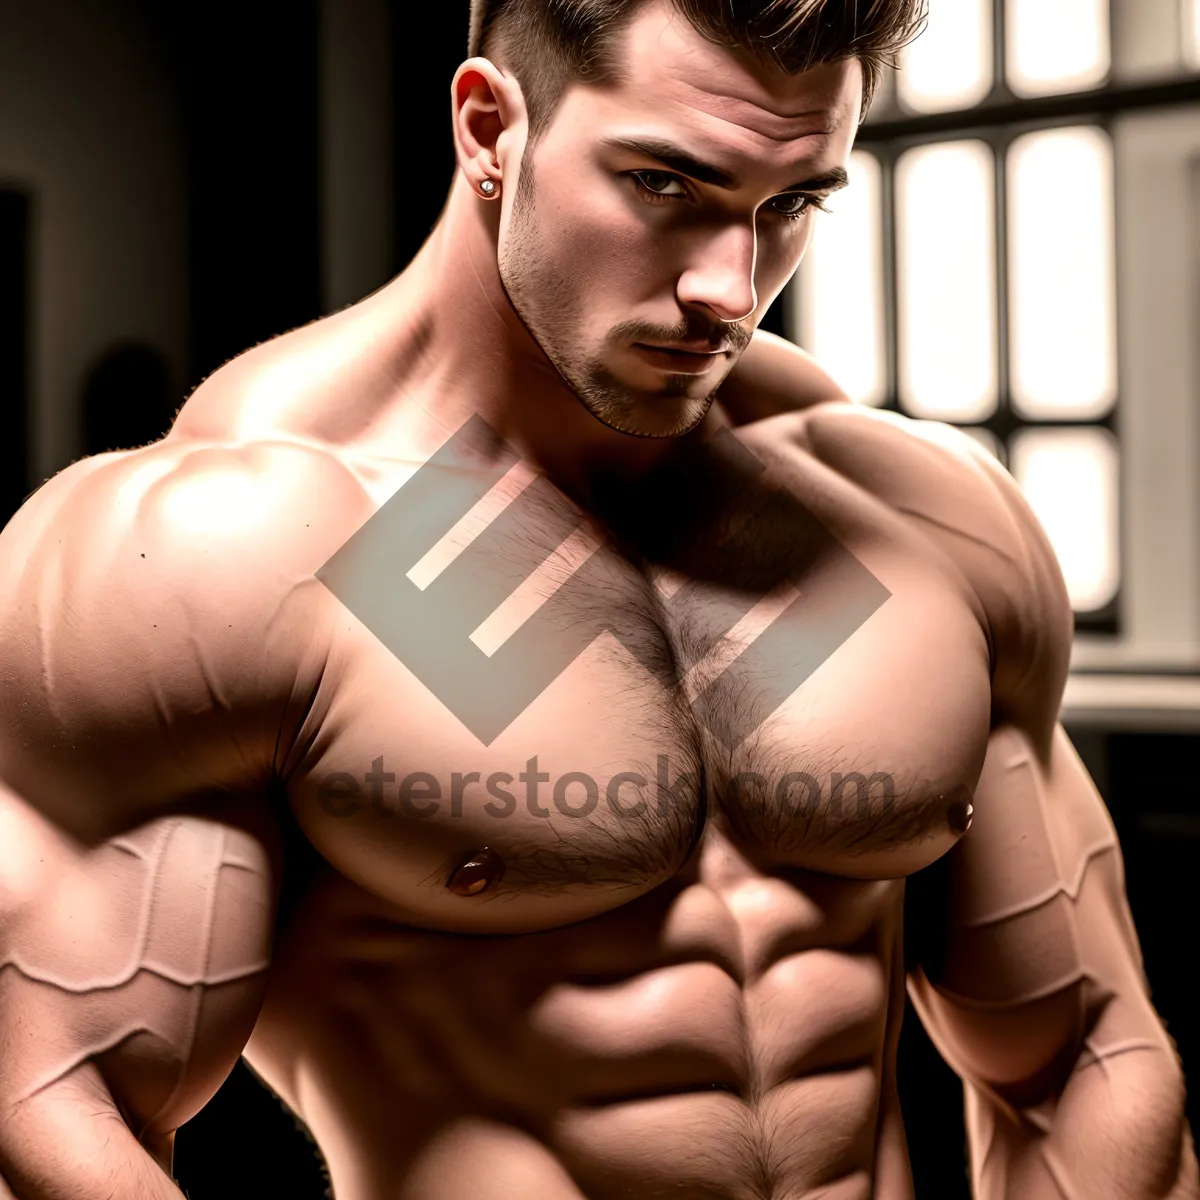 Picture of Muscular Male Fitness Model Posing Shirtless